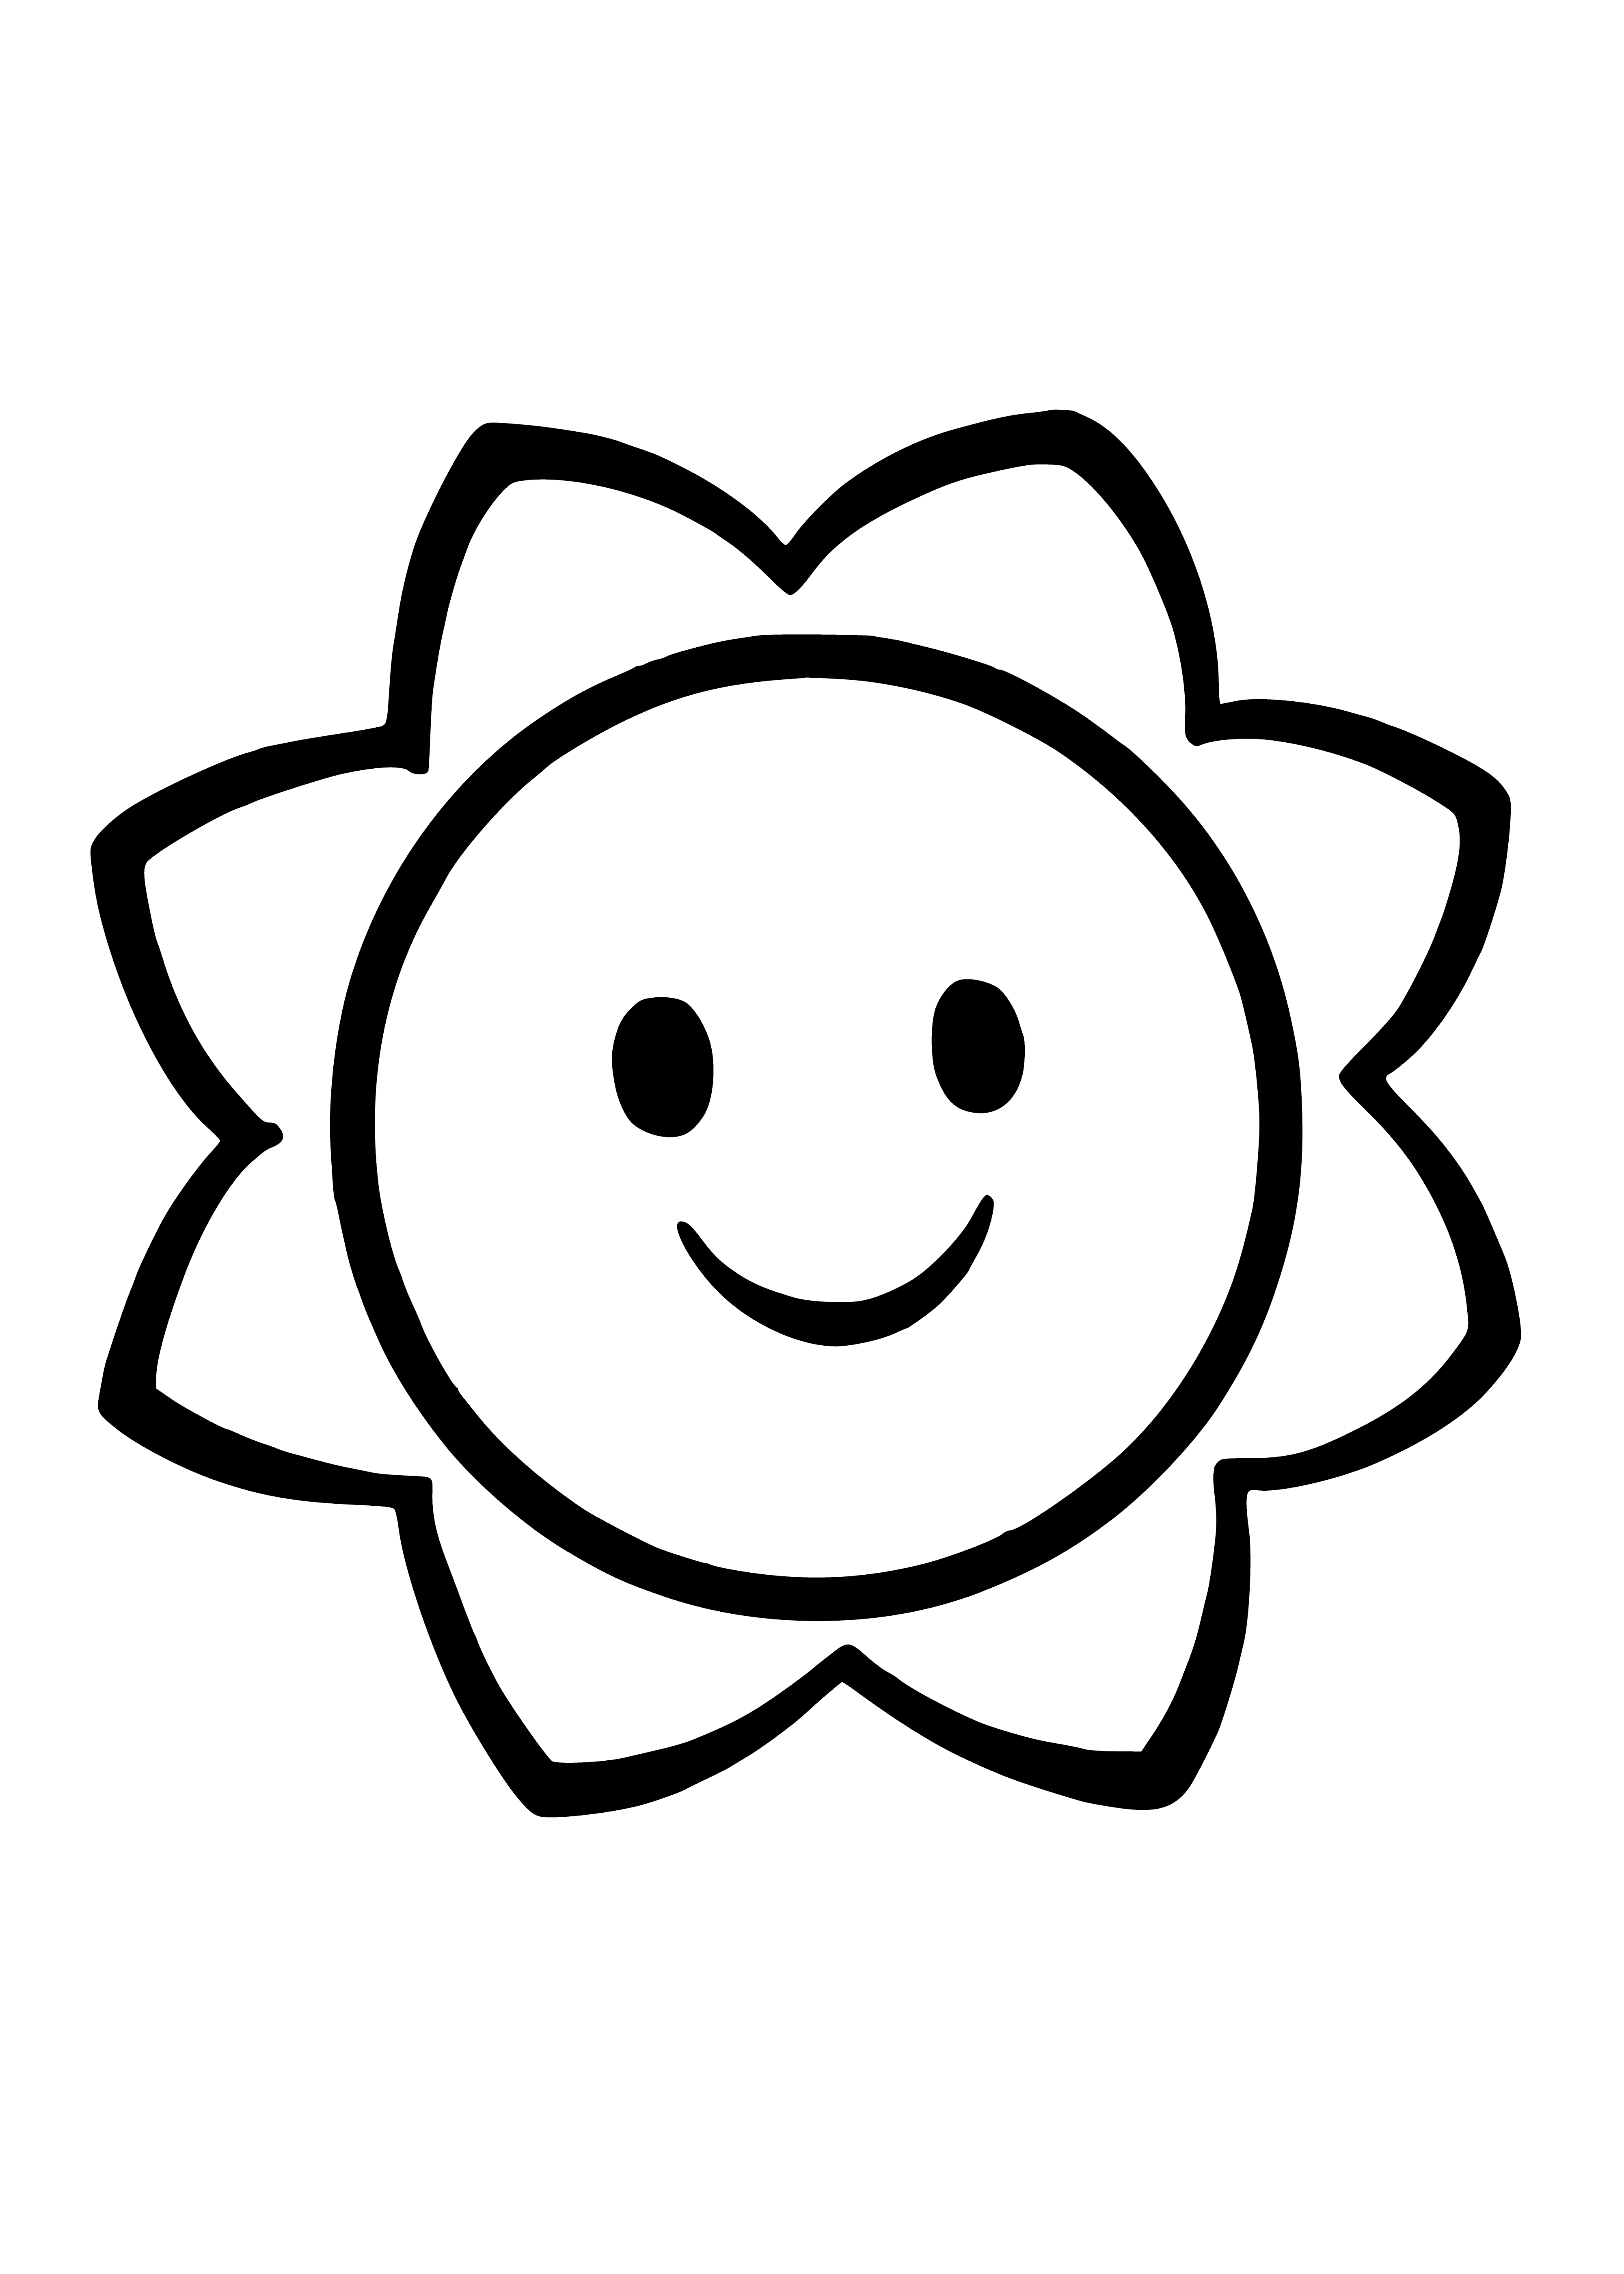 coloring page: A smiling sun with yellow face and orange rays.